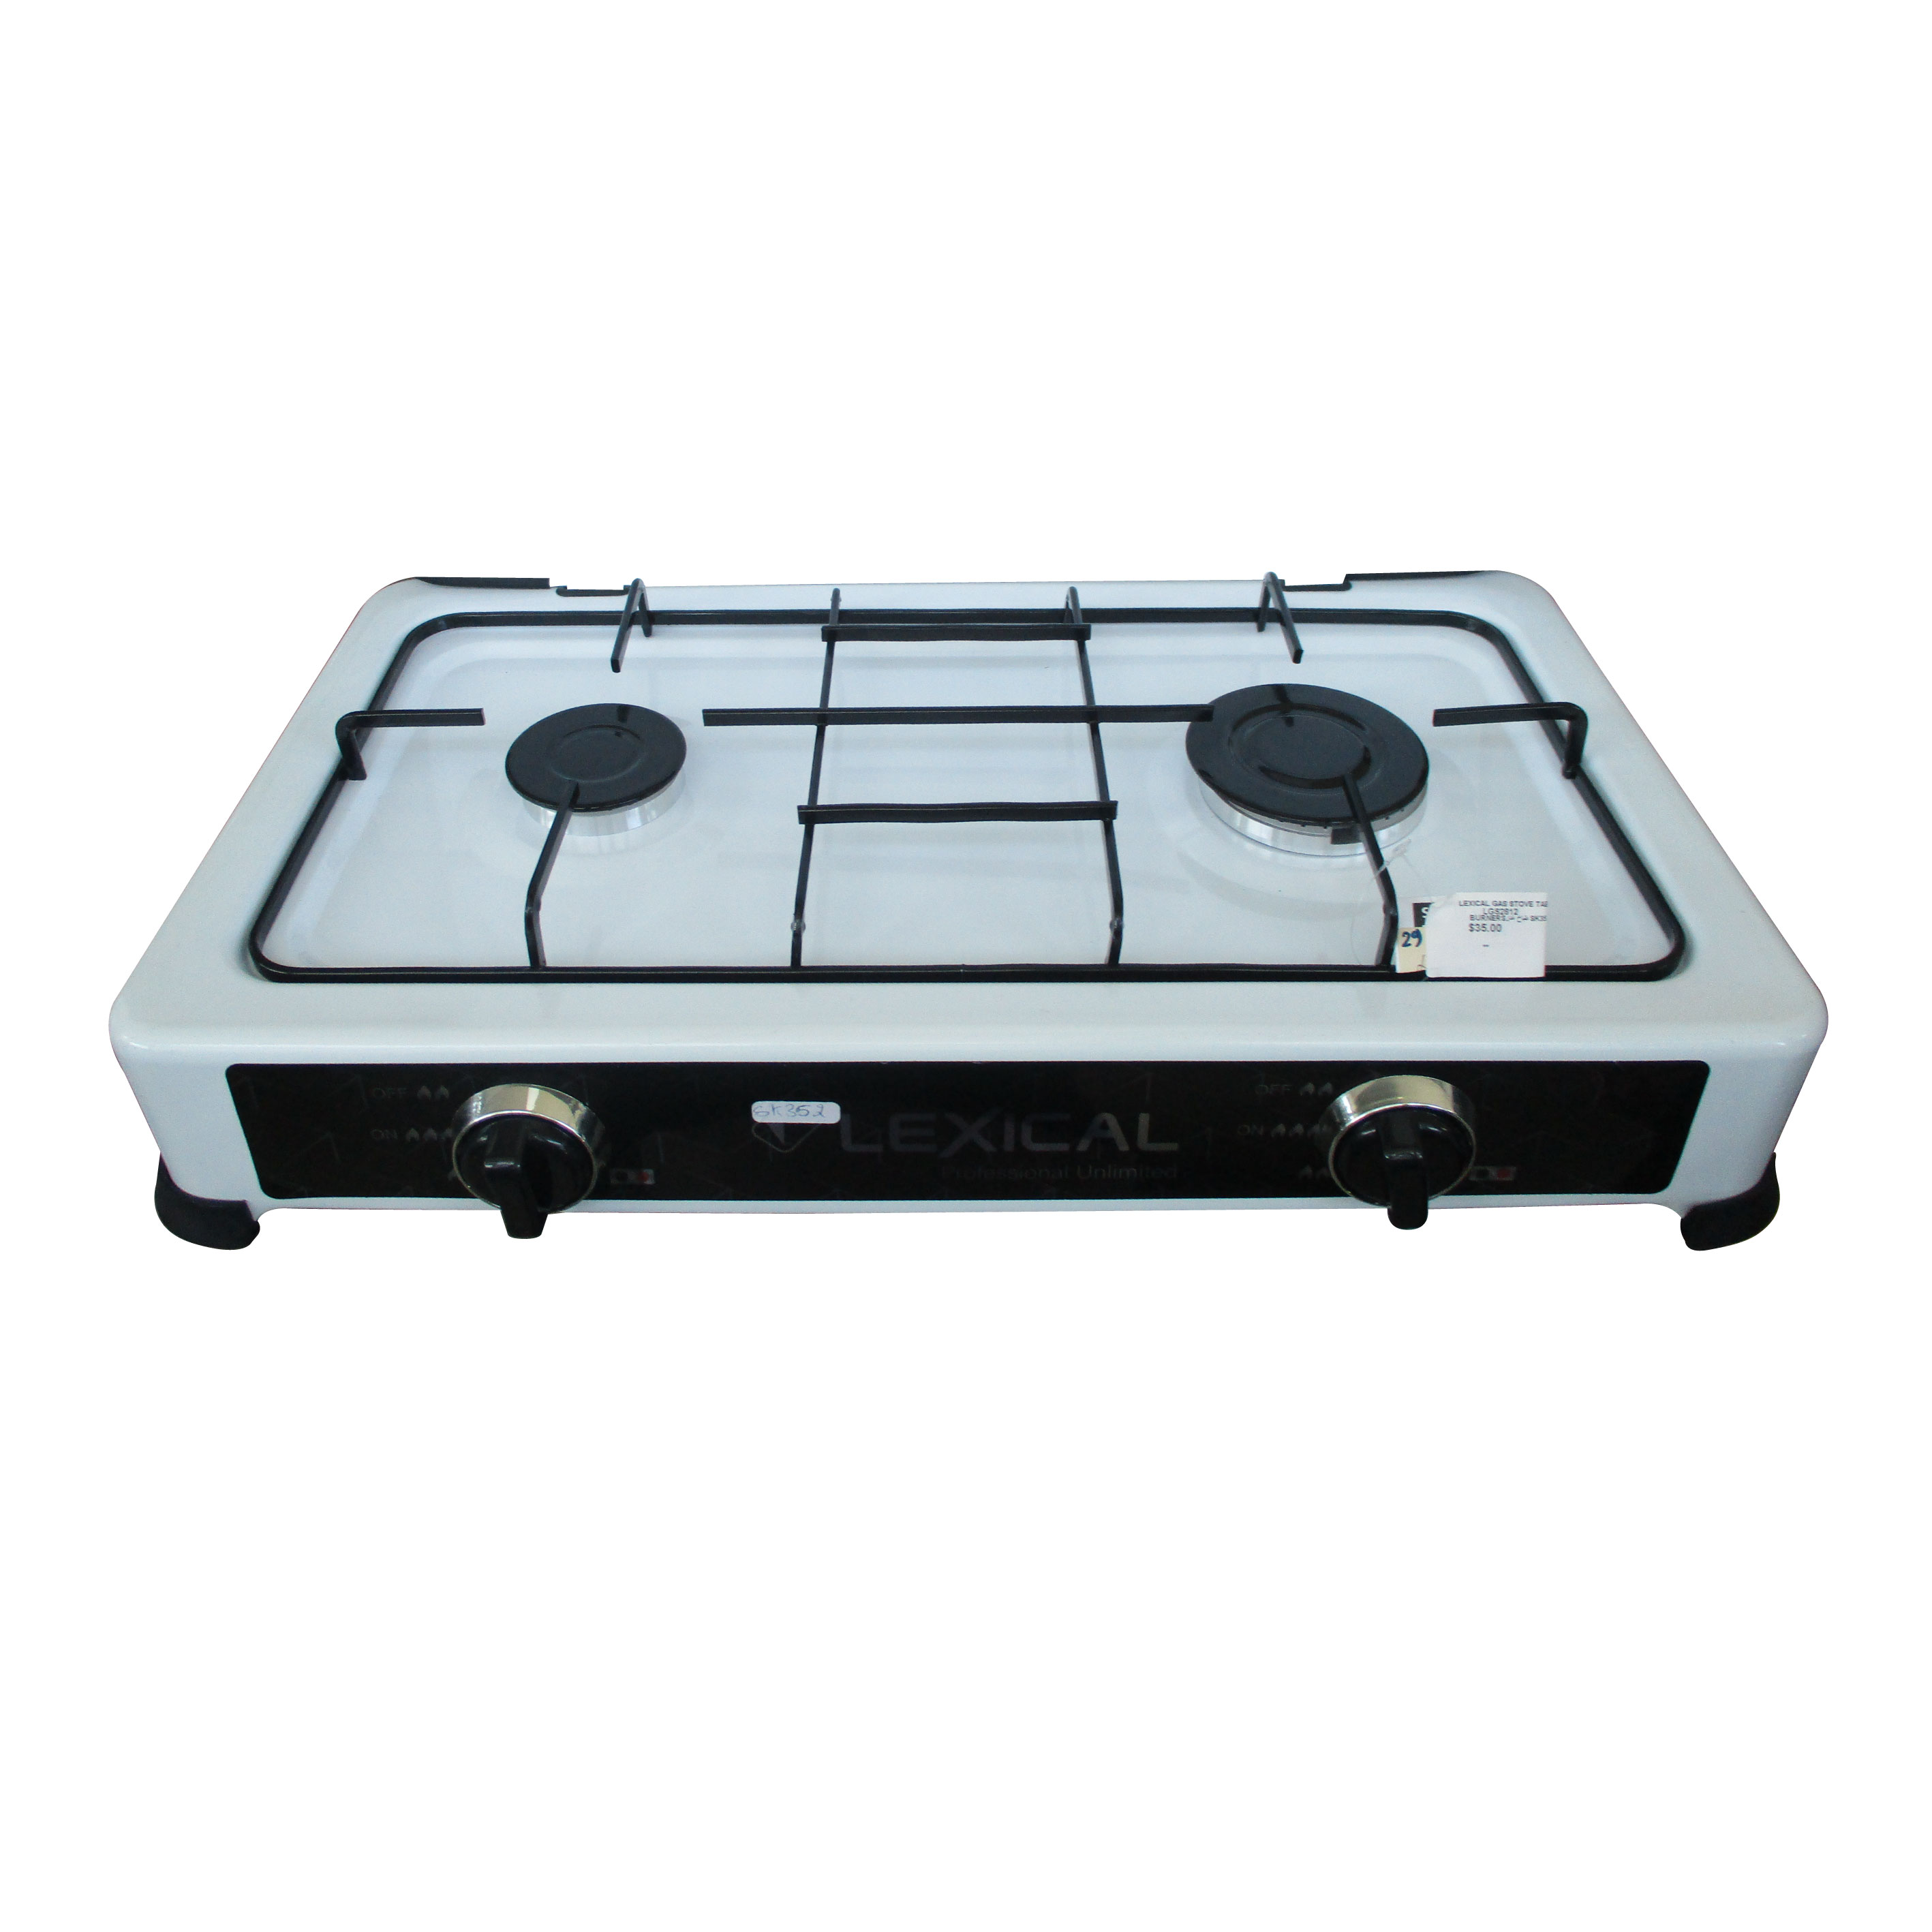 Lexical Gas Stove Table Top 2 Burners, SK352